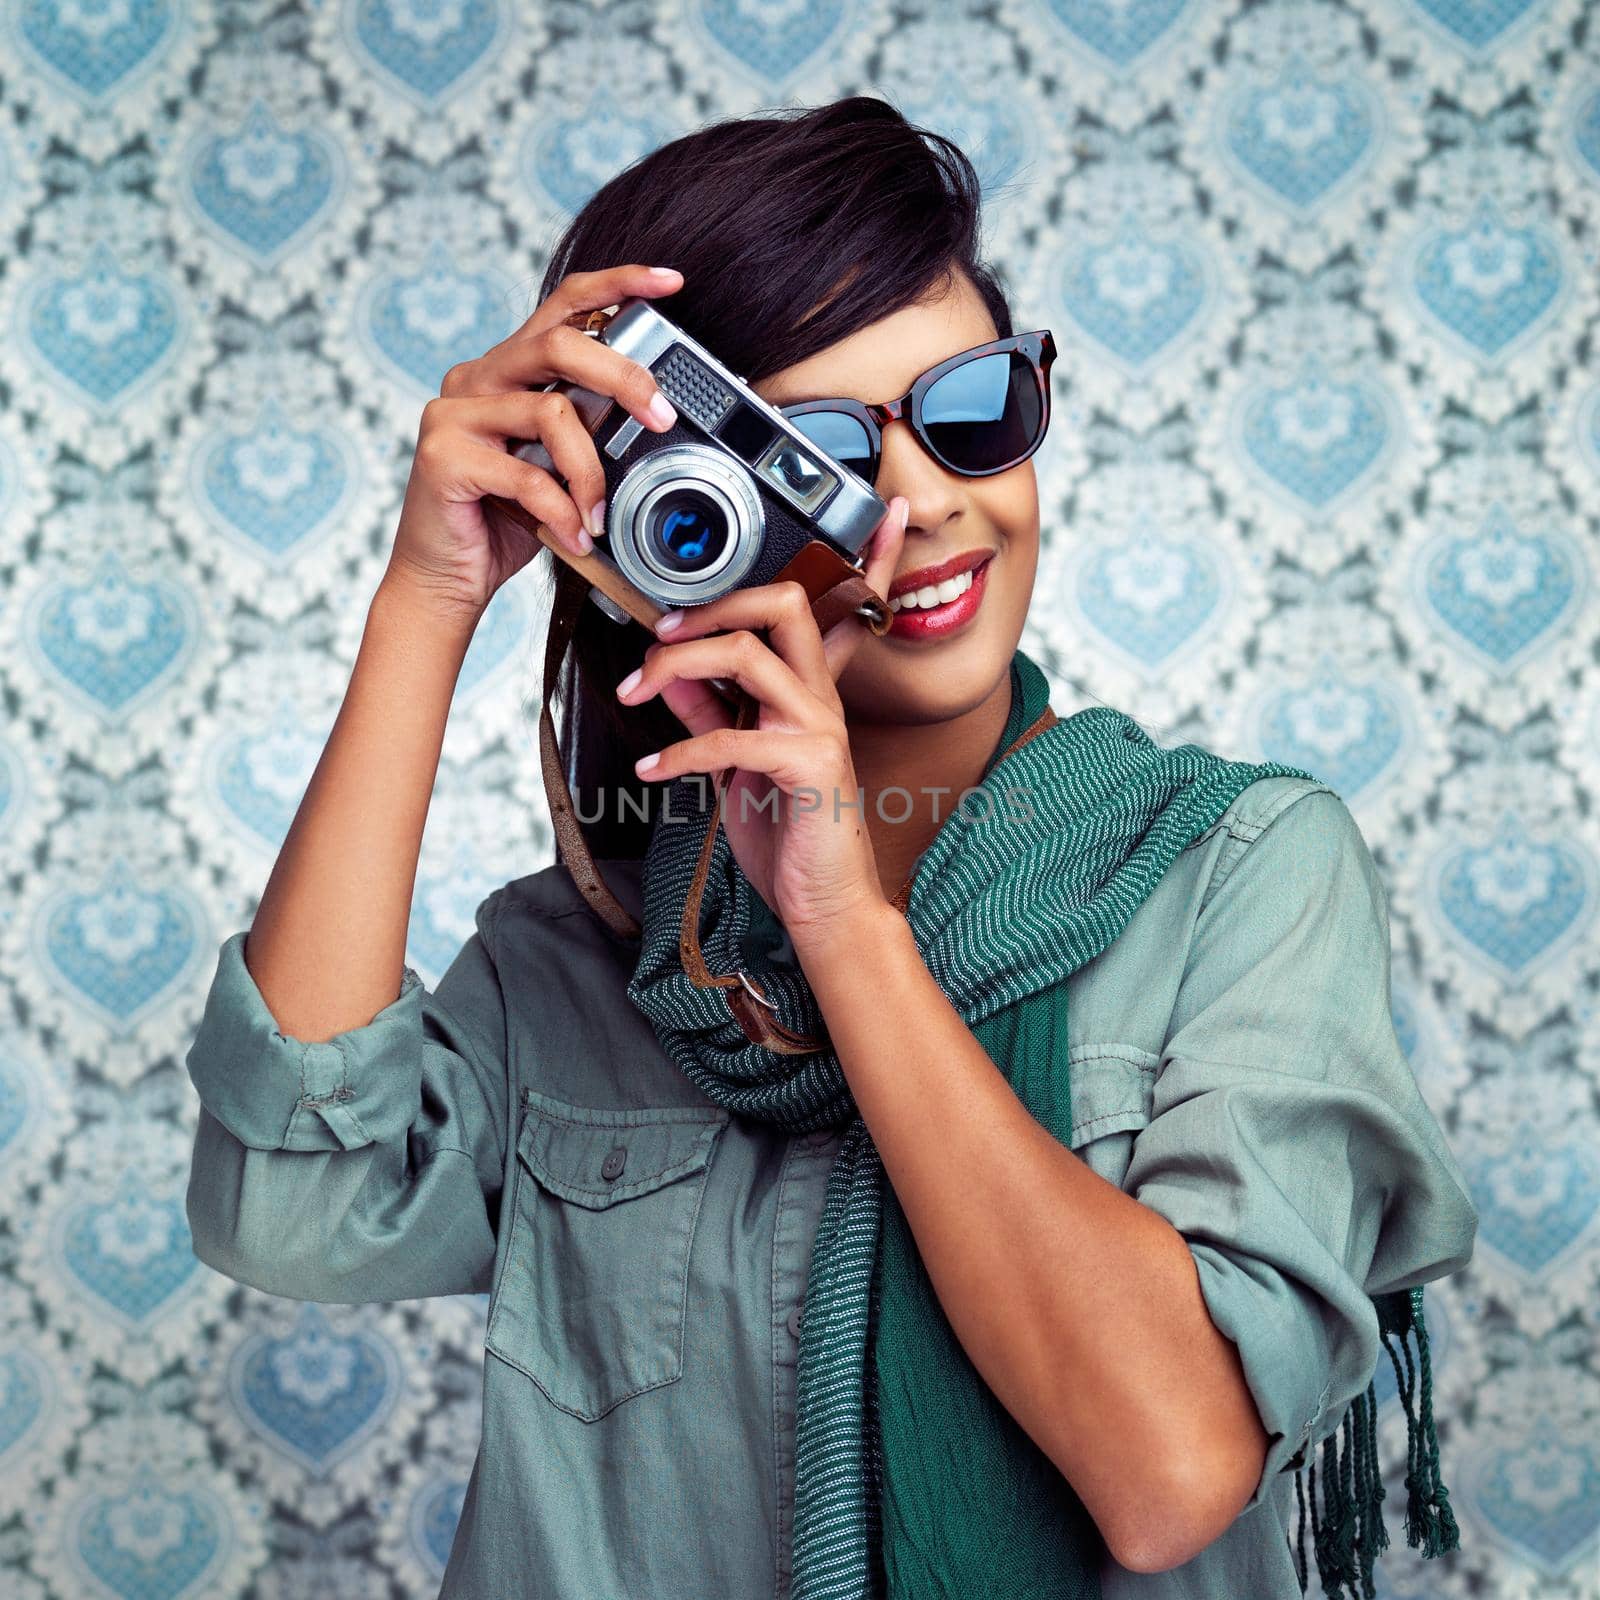 Shot of a young woman posing with a camera over a patterned background.